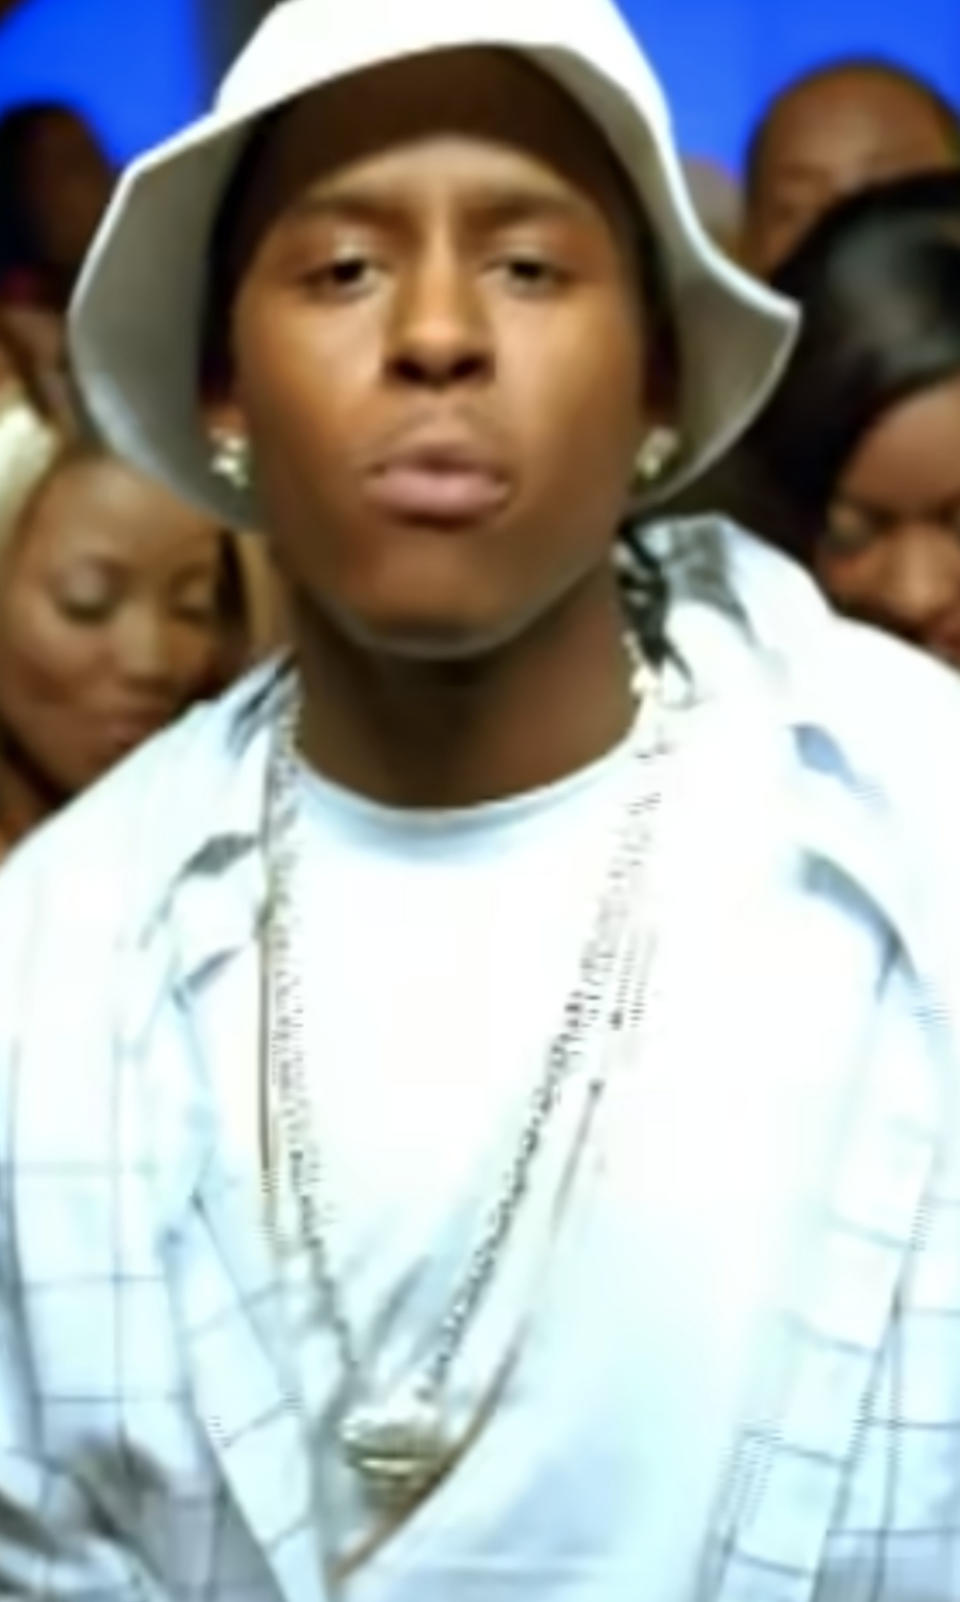 J-Kwon in his "Tipsy" music video